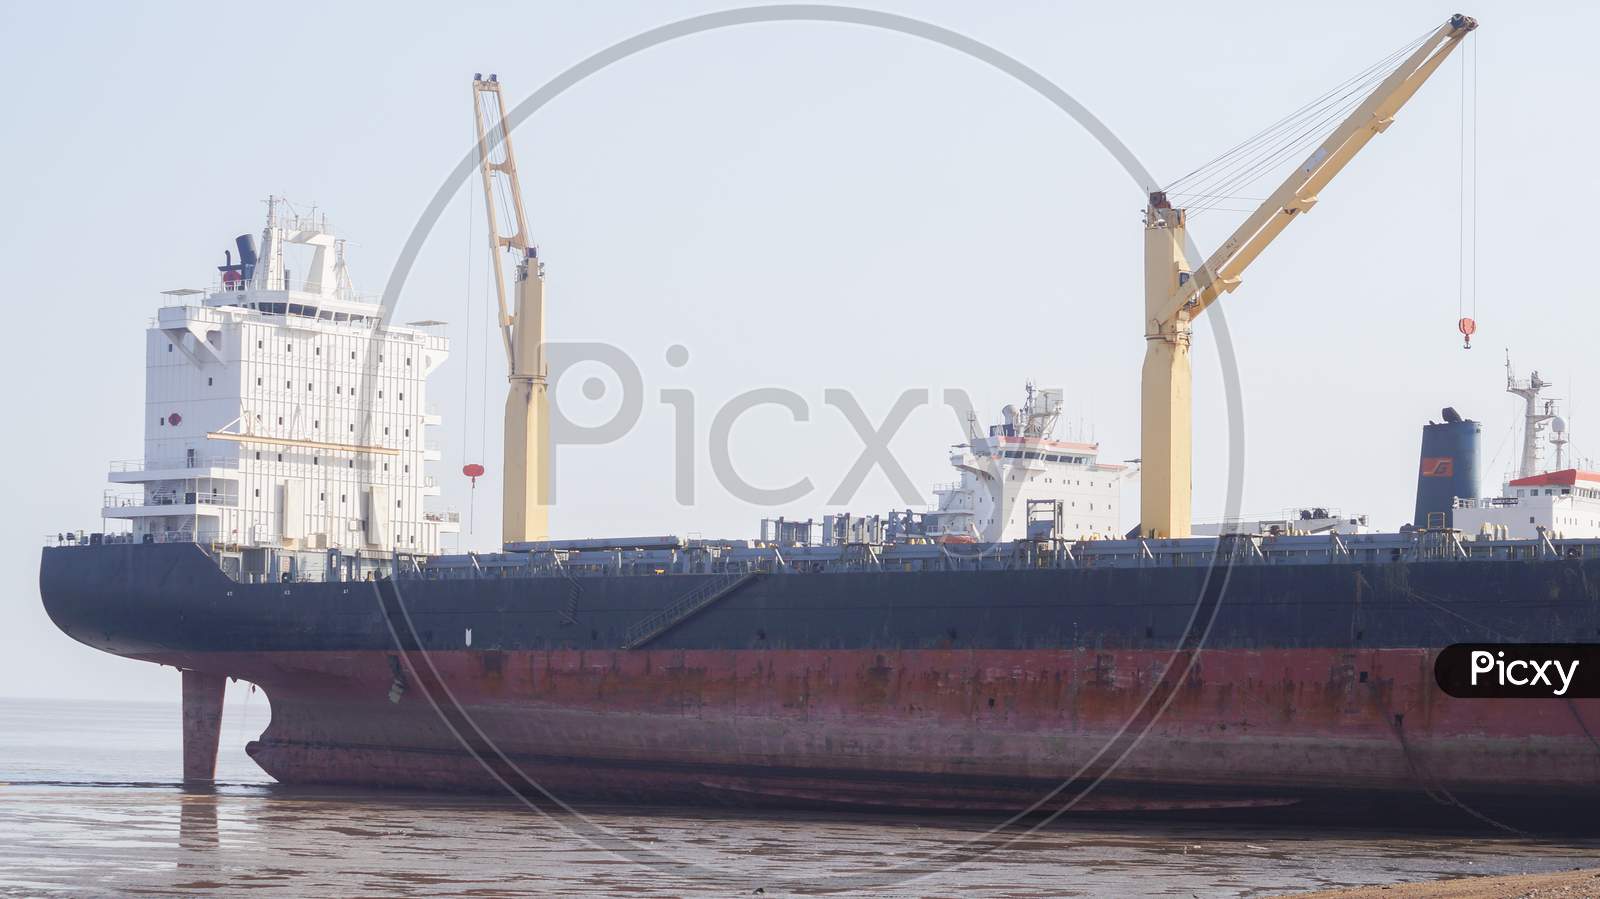 The empty cargo ship at alang port